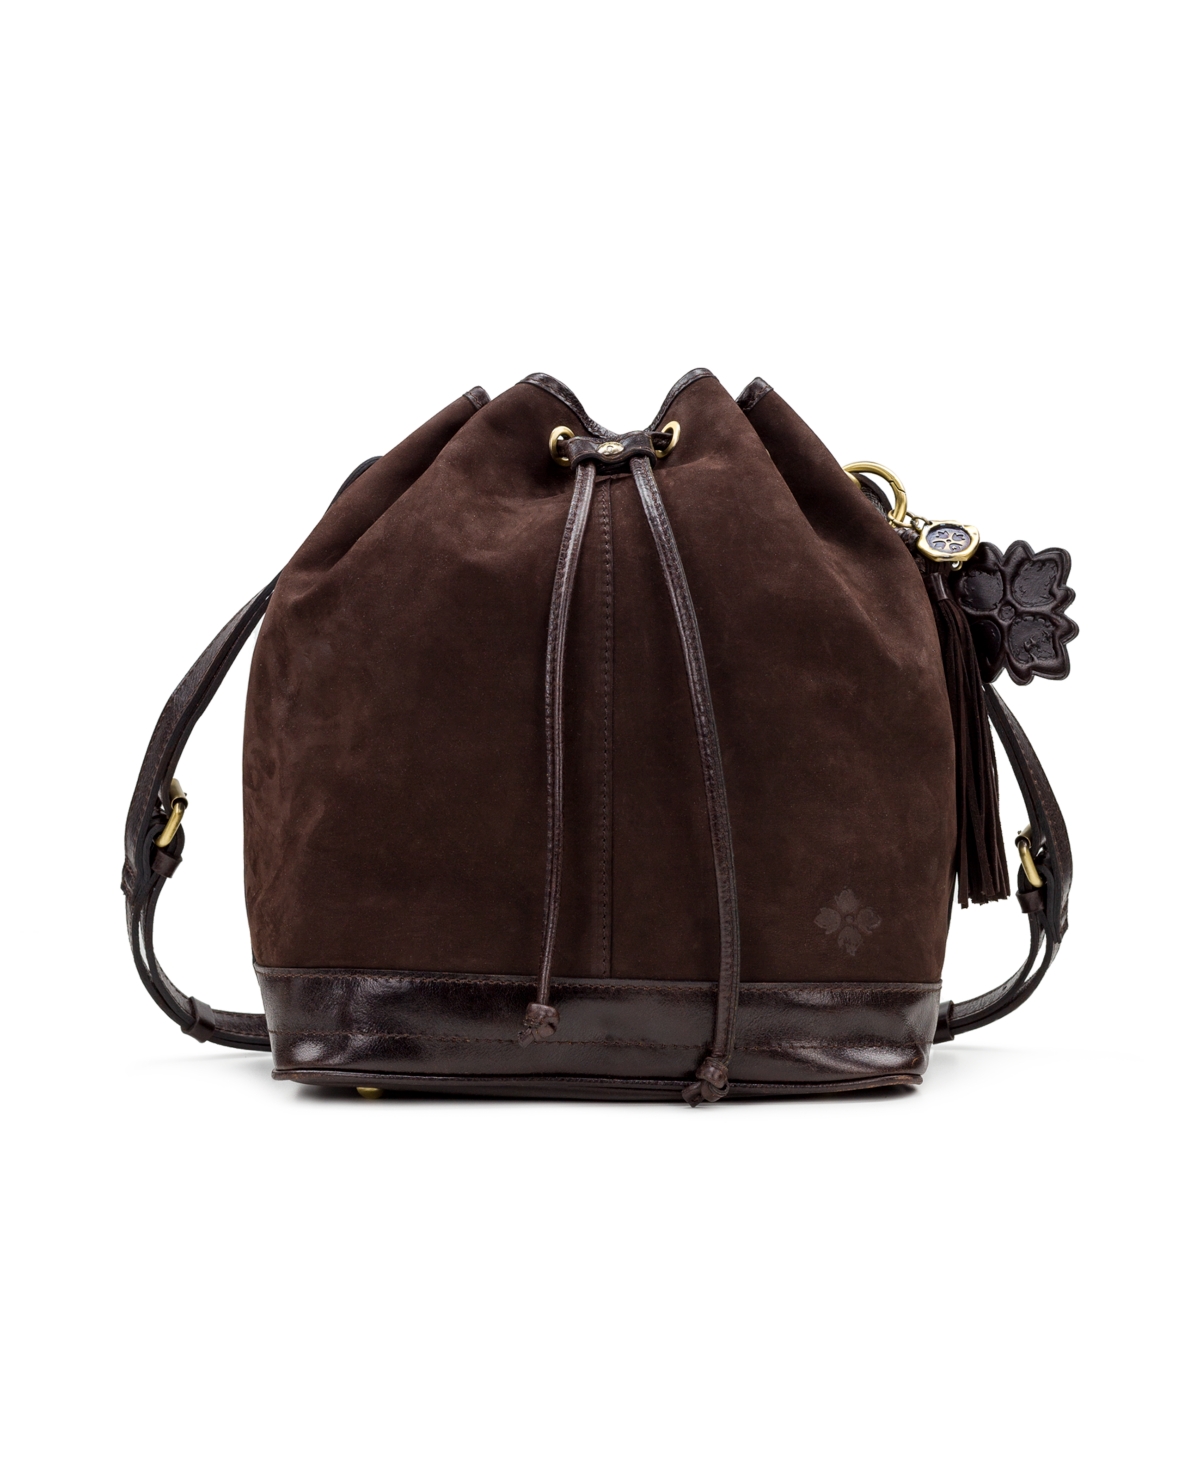 Patricia Nash Women's Melrose Drawstring Large Bag And Key Fob In Chocolate